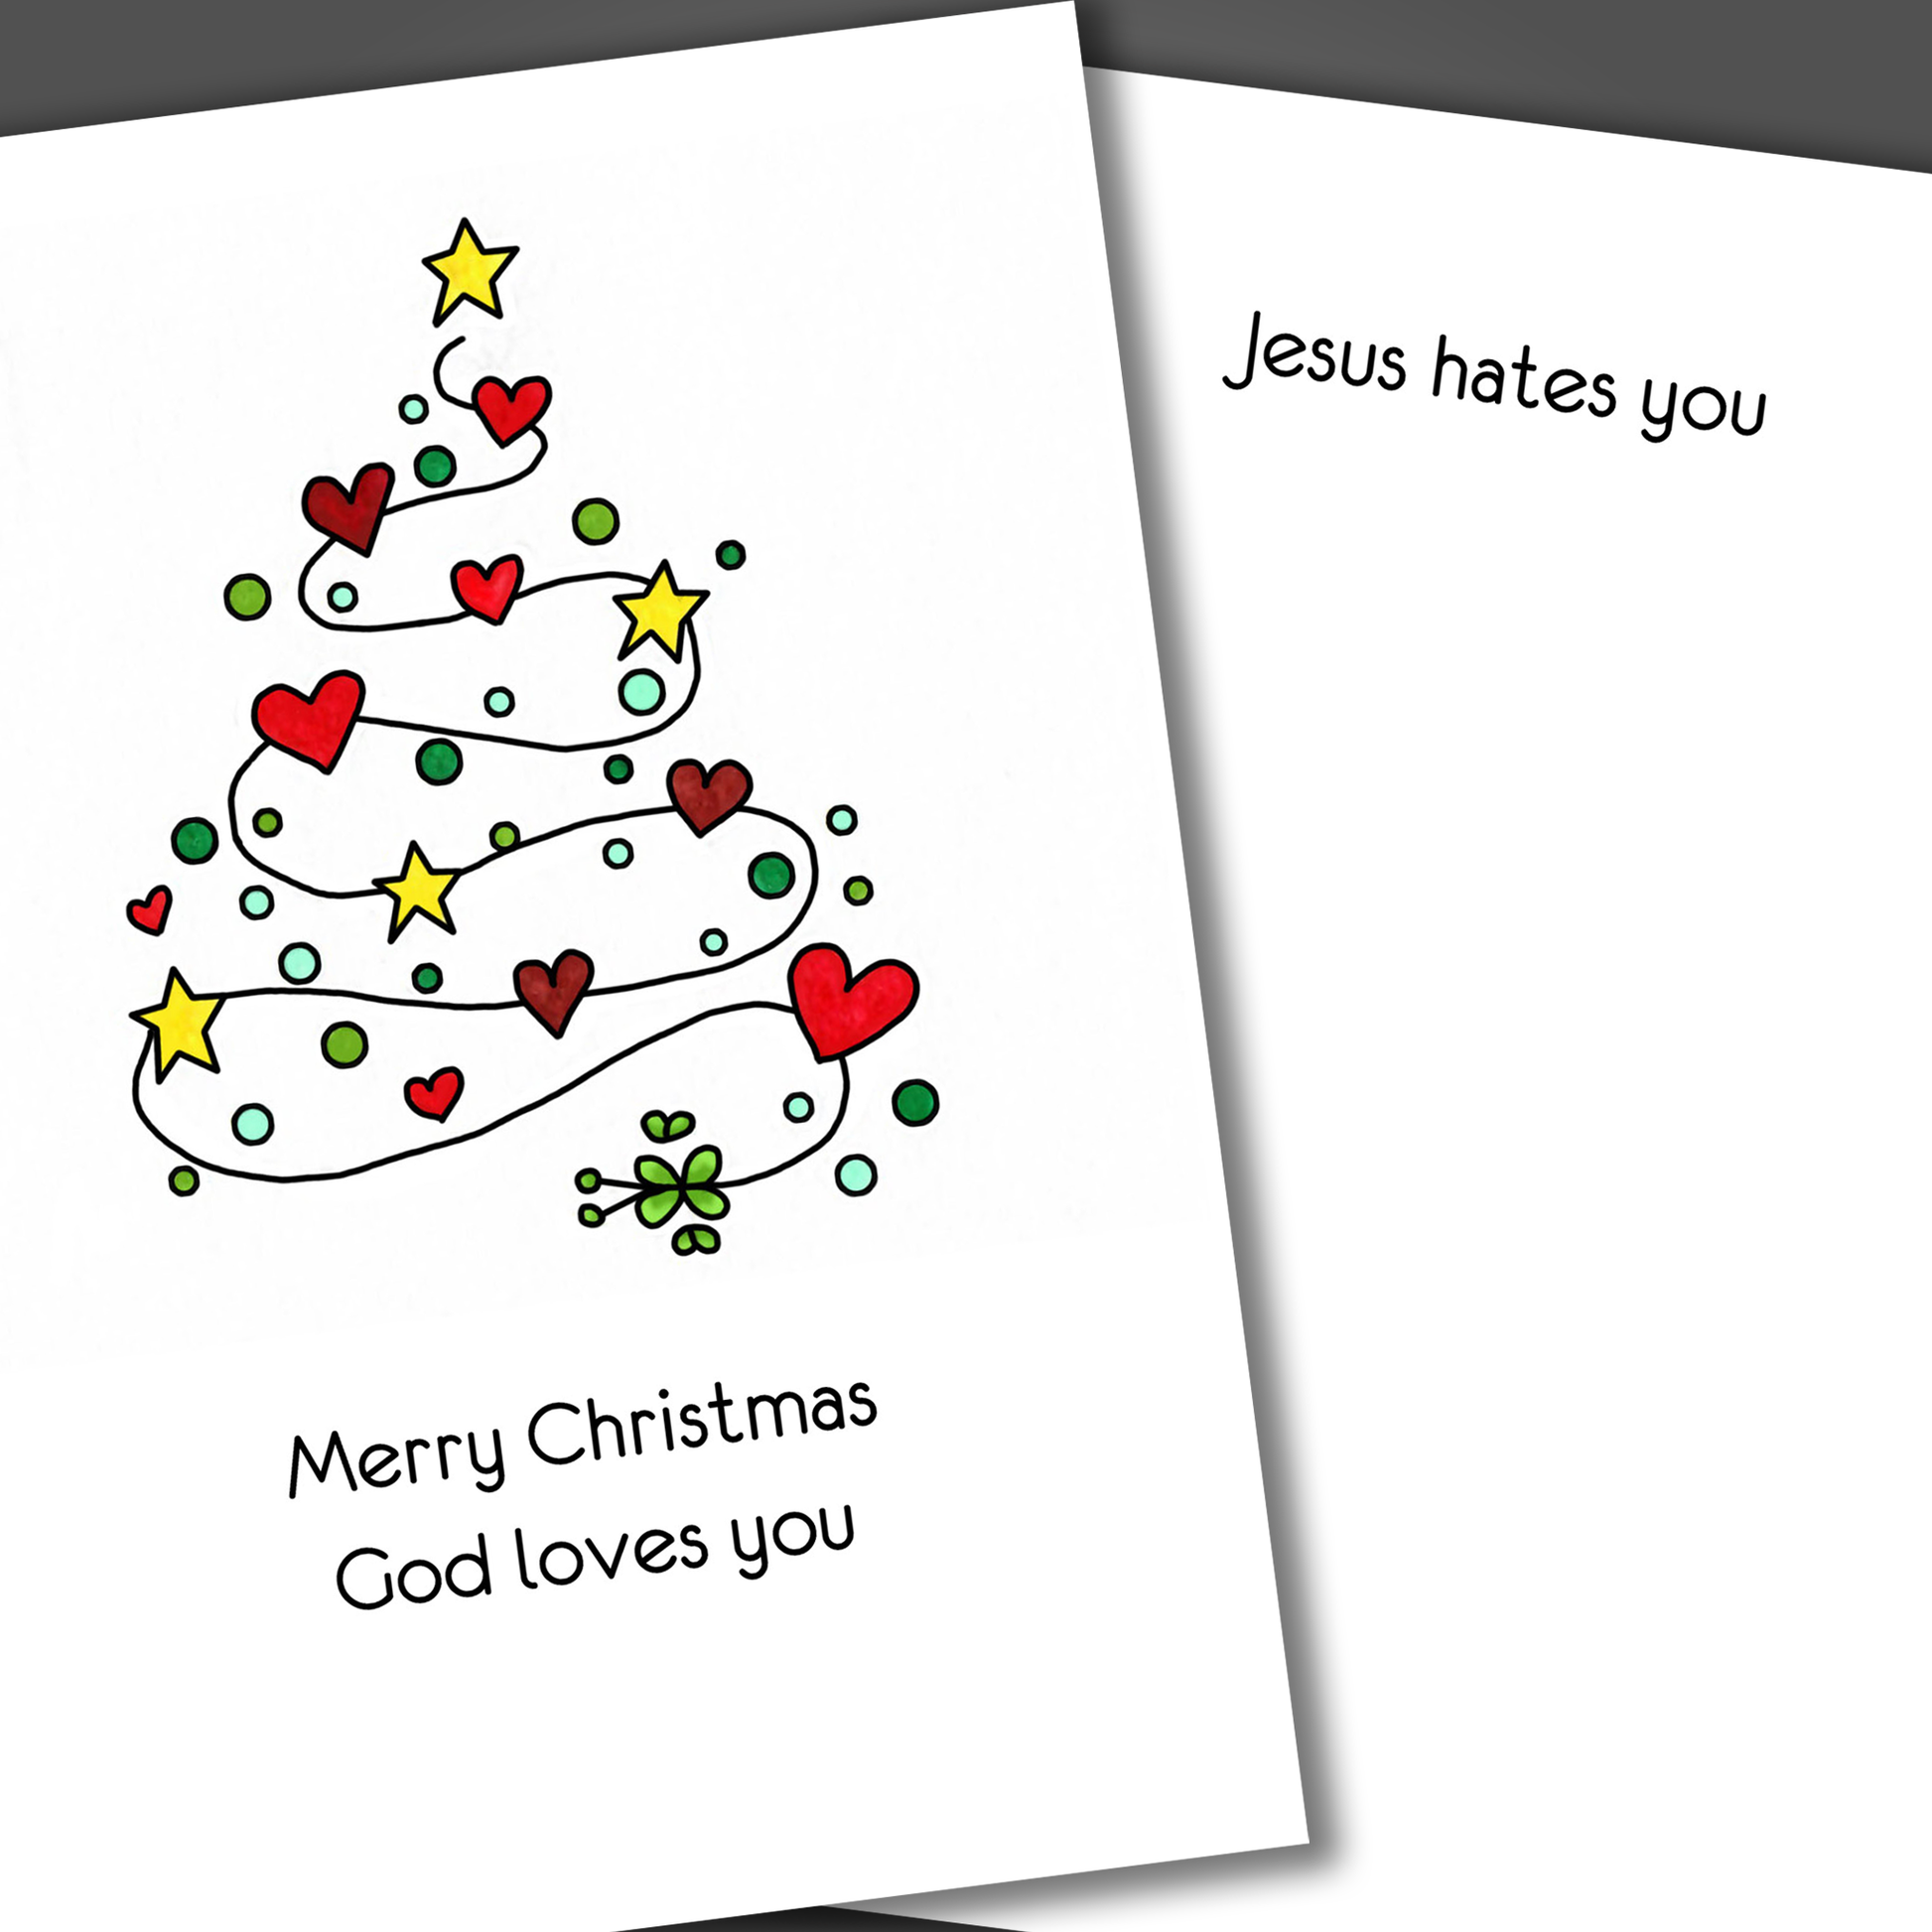 Funny Christmas Card with hearts and tree on the front of the card. Inside the card is a funny joke that says Jesus hates you.